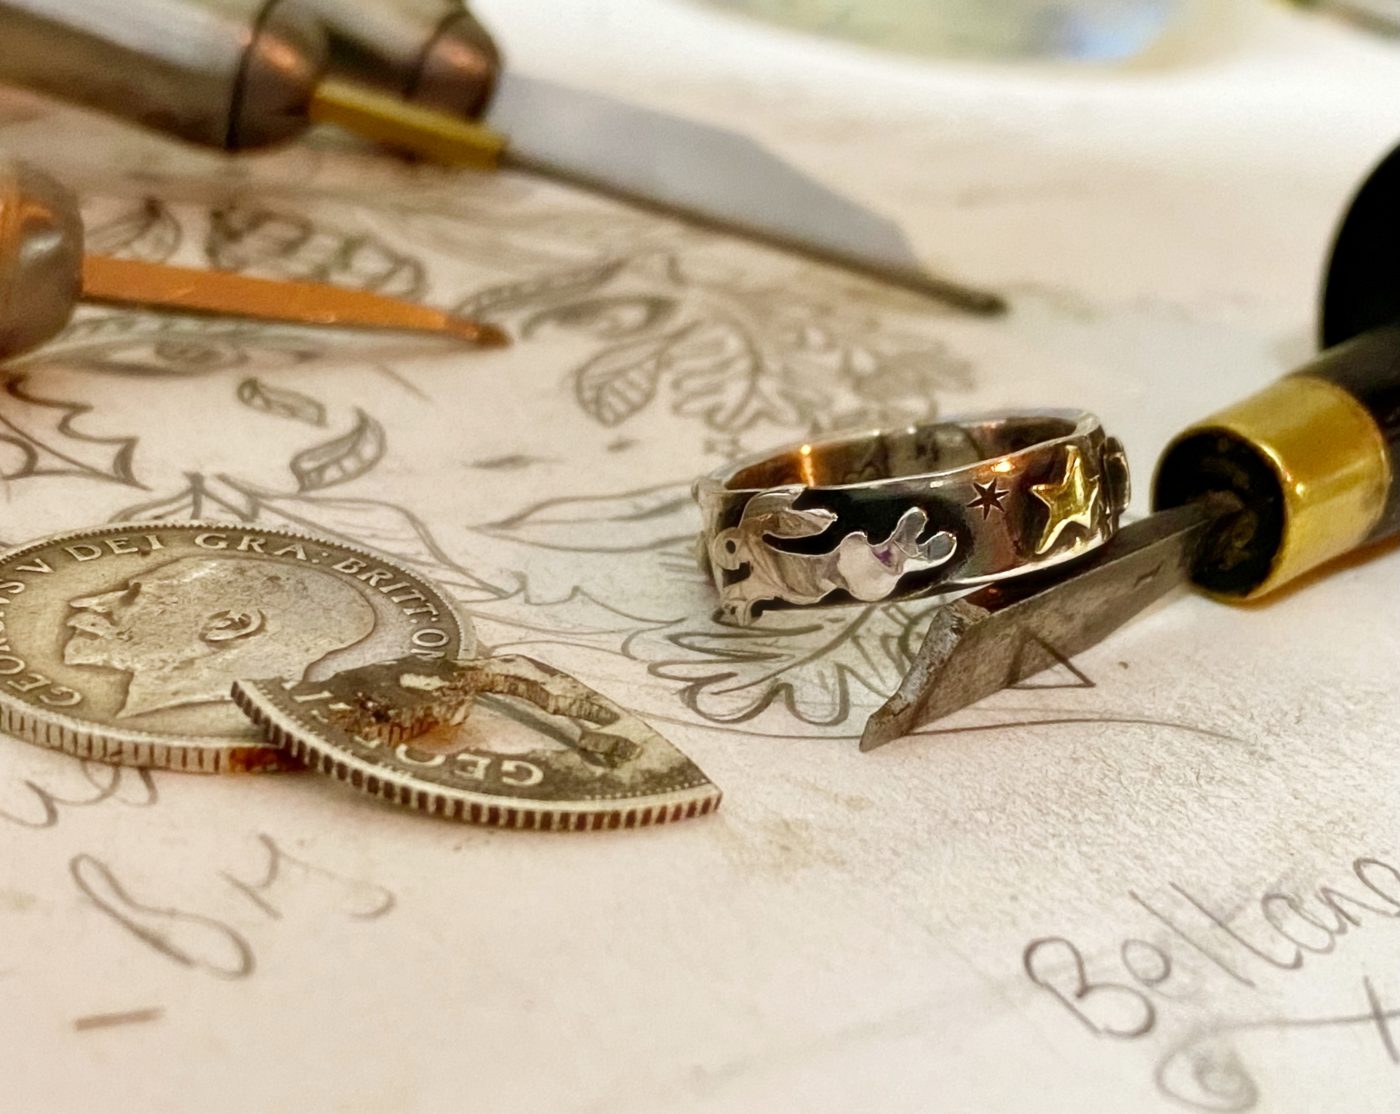 handcrafted and recycled silver sixpence and fork magical leaping hare ring